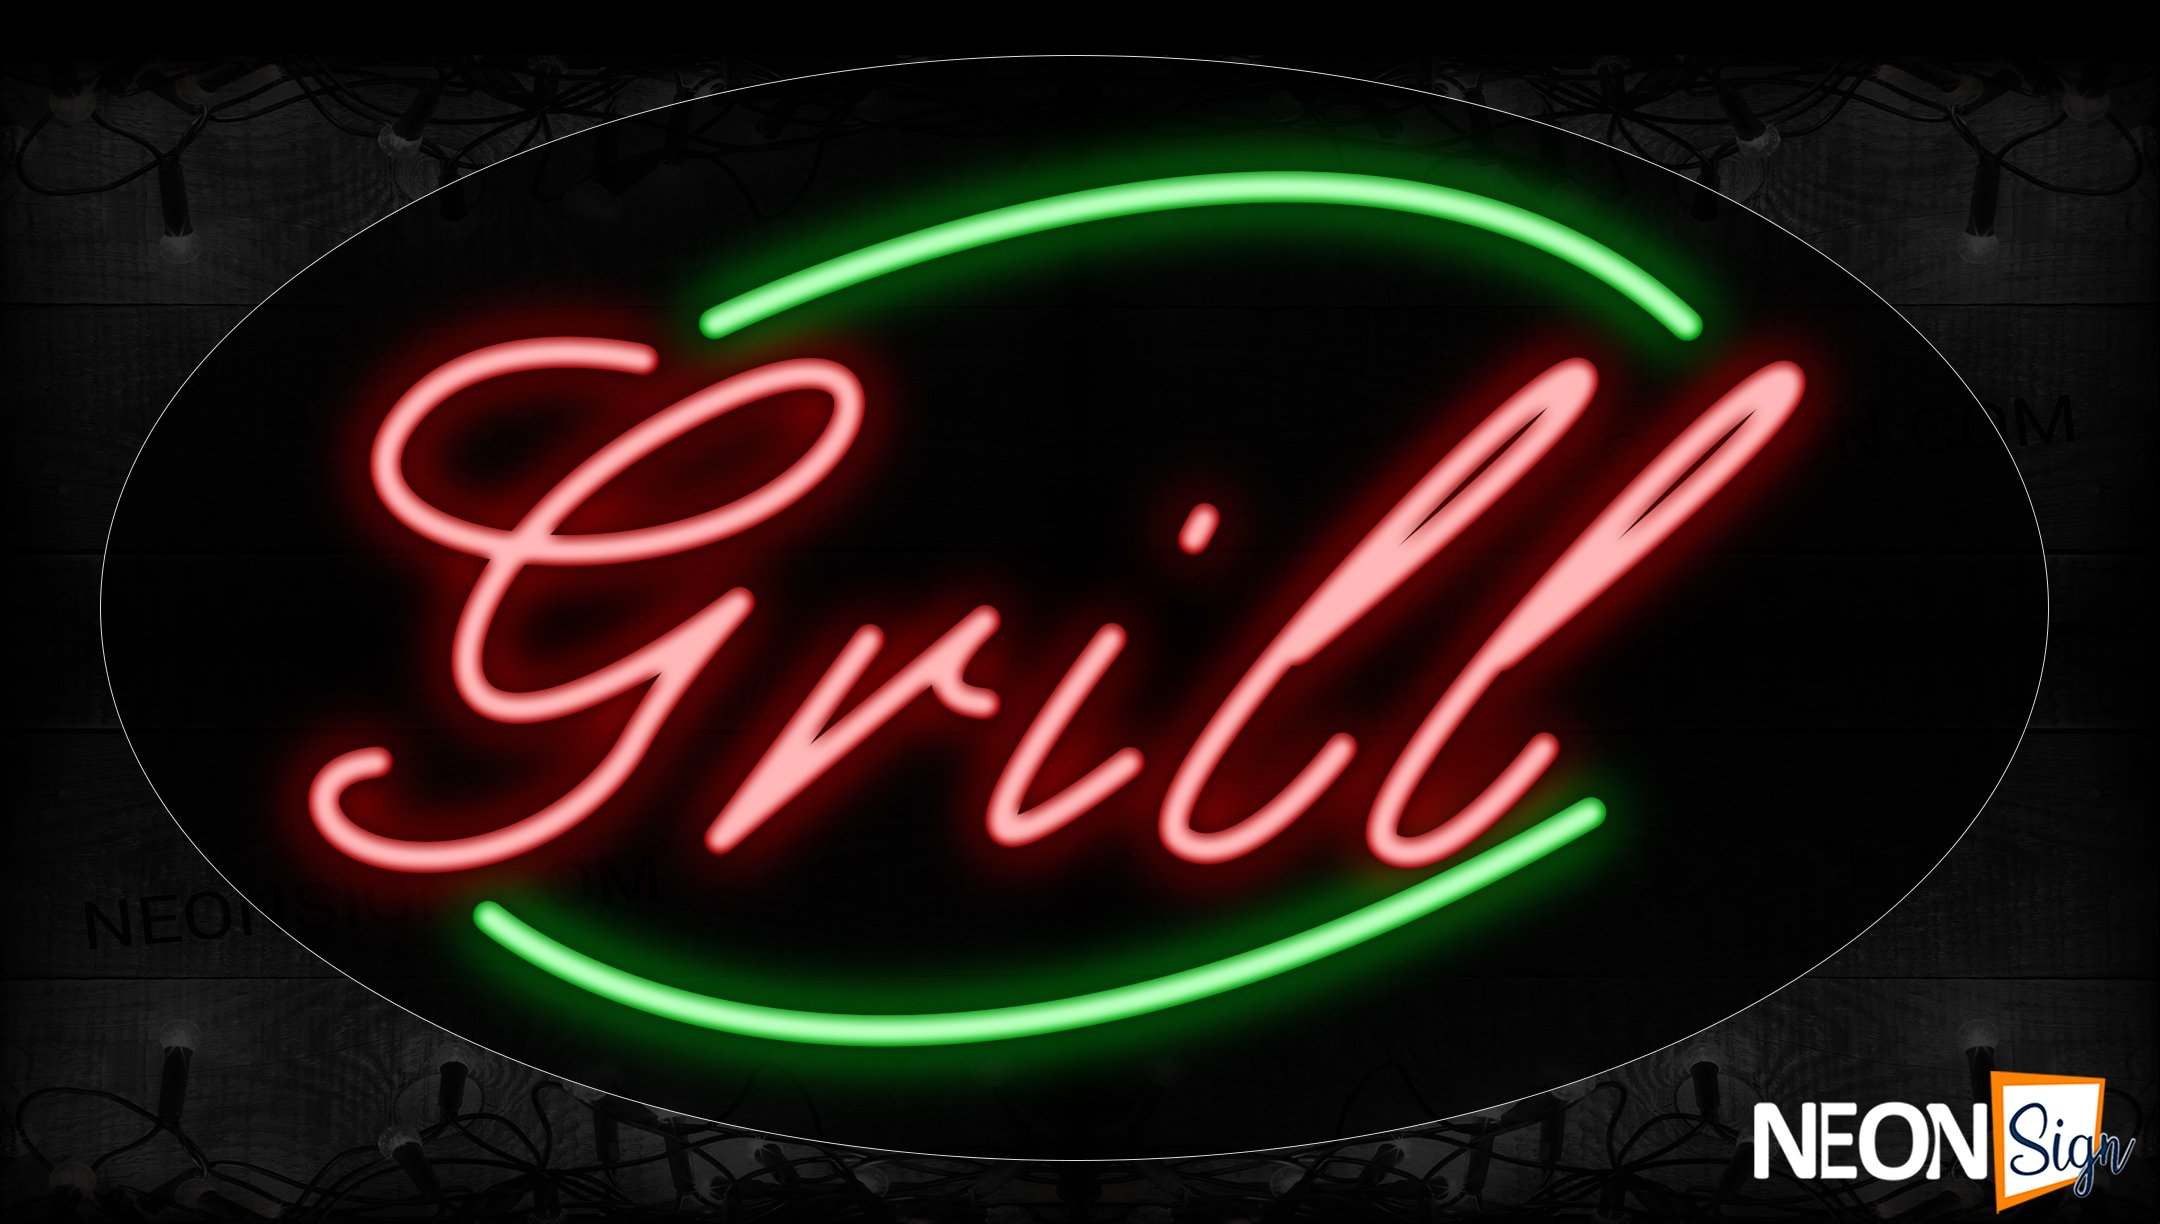 Image of 14046 Grill In Red With Green Arc Border Neon Signs_17x30 Contoured Black Backing